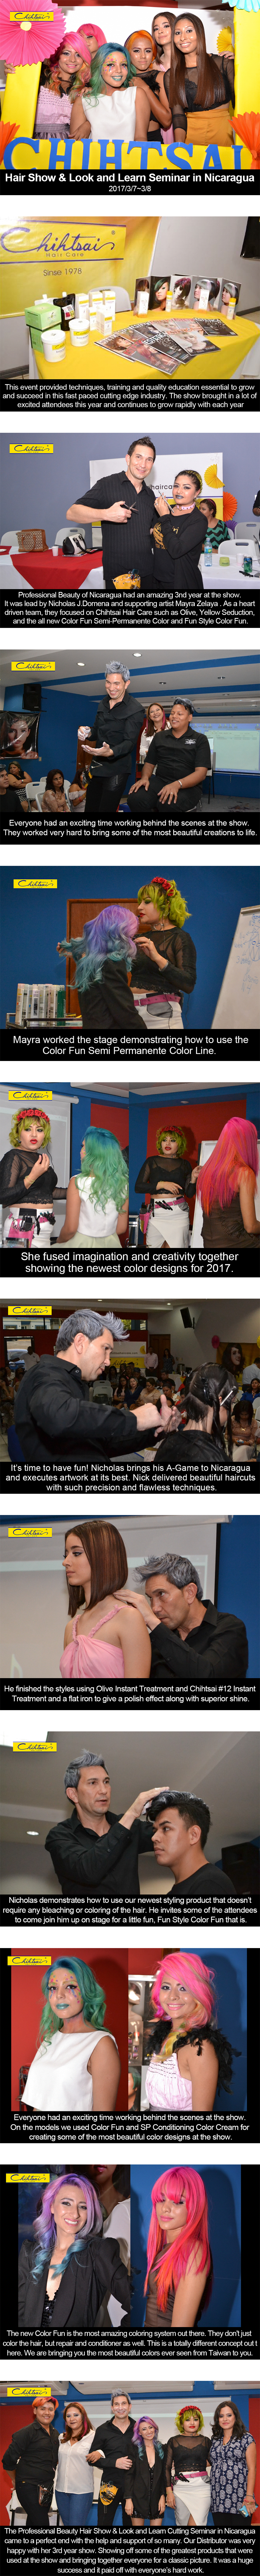 Hair Show & Look and Learn Seminar in